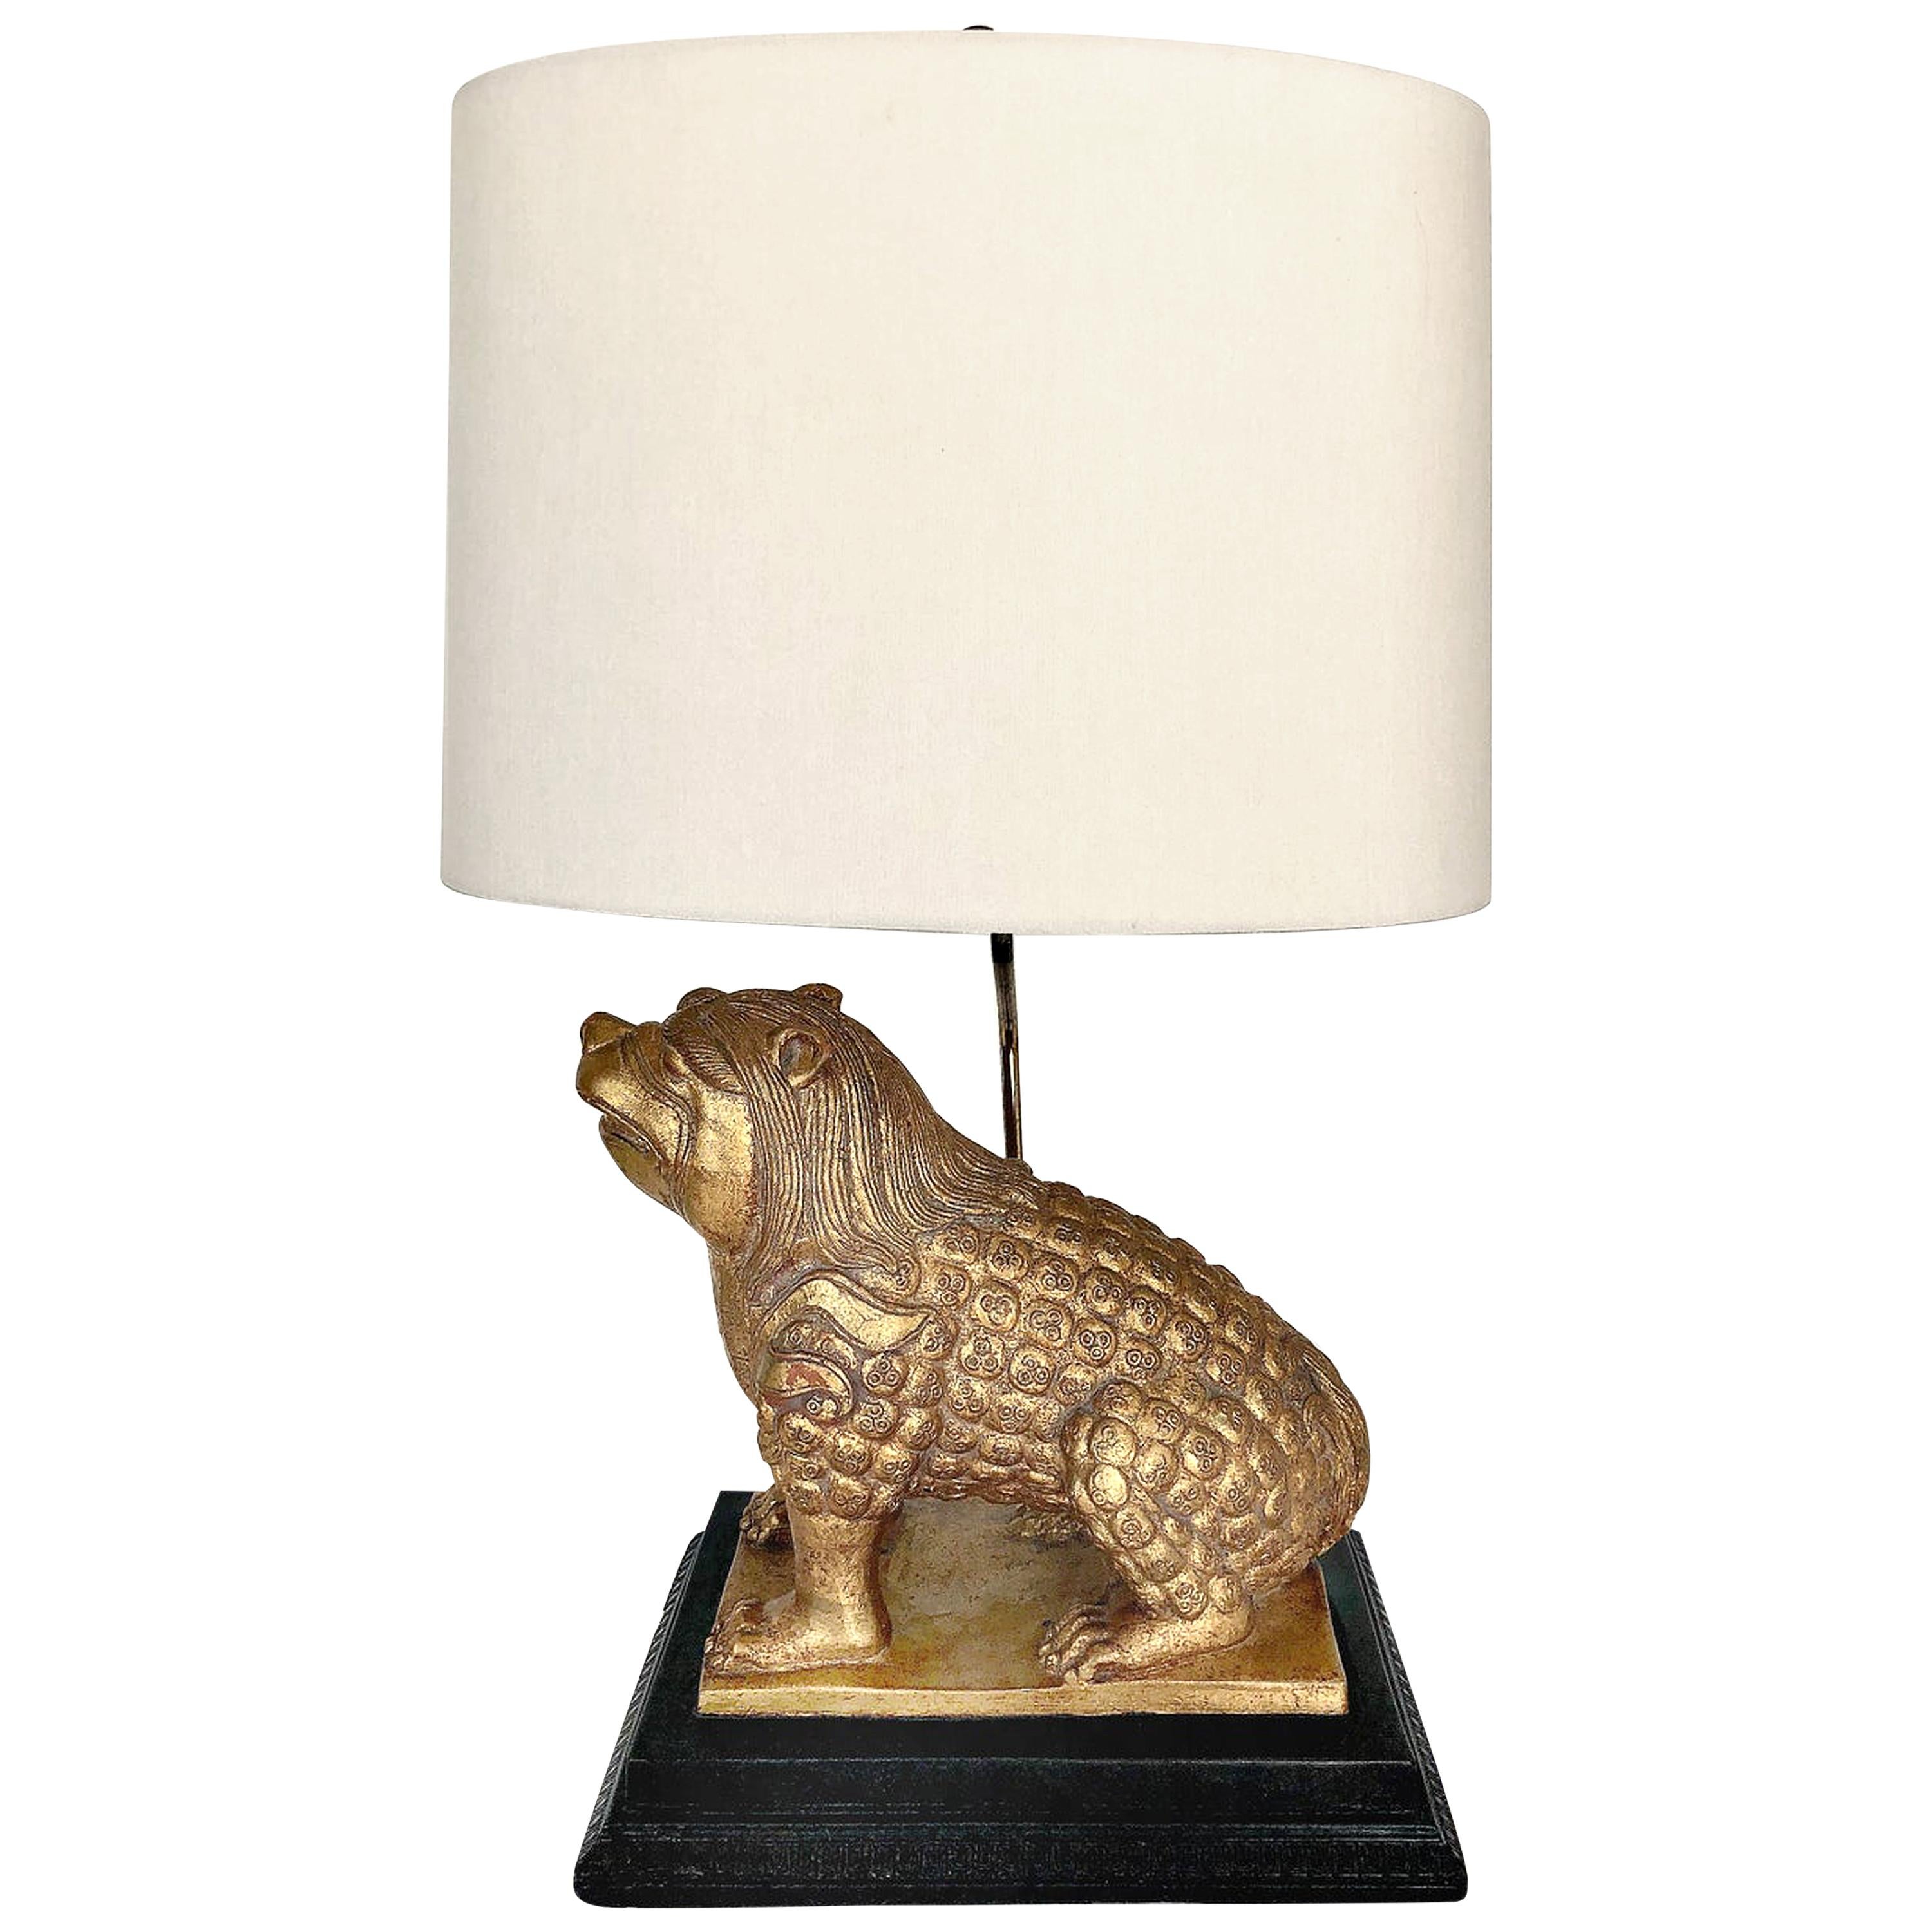 1950s Gilt Pottery Foo Dog Lamp, after Tony Duquette